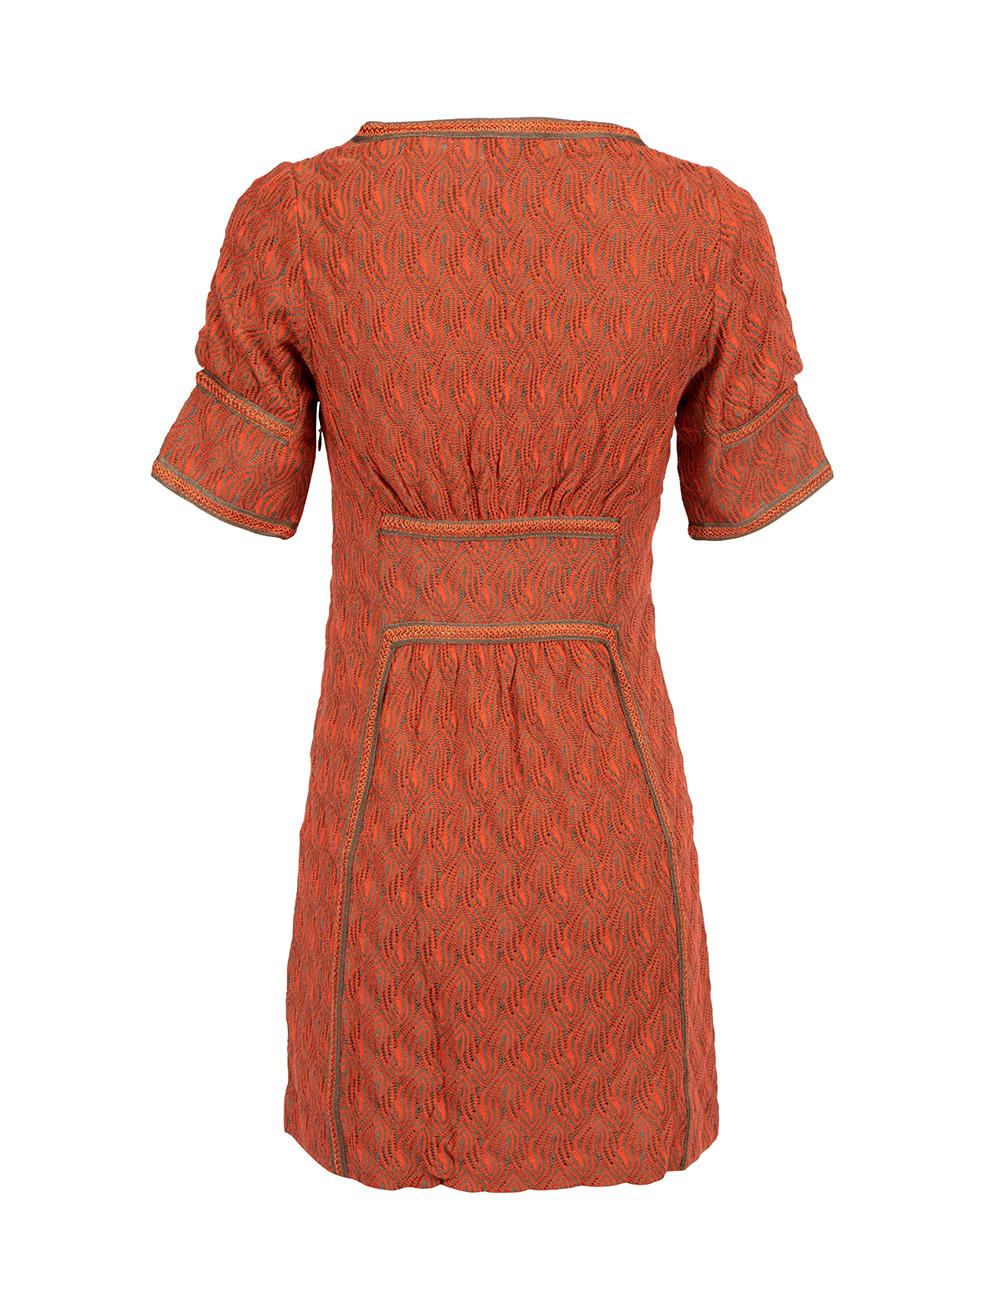 Missoni Women's Orange Abstract Pattern V Neck Dress In New Condition For Sale In London, GB